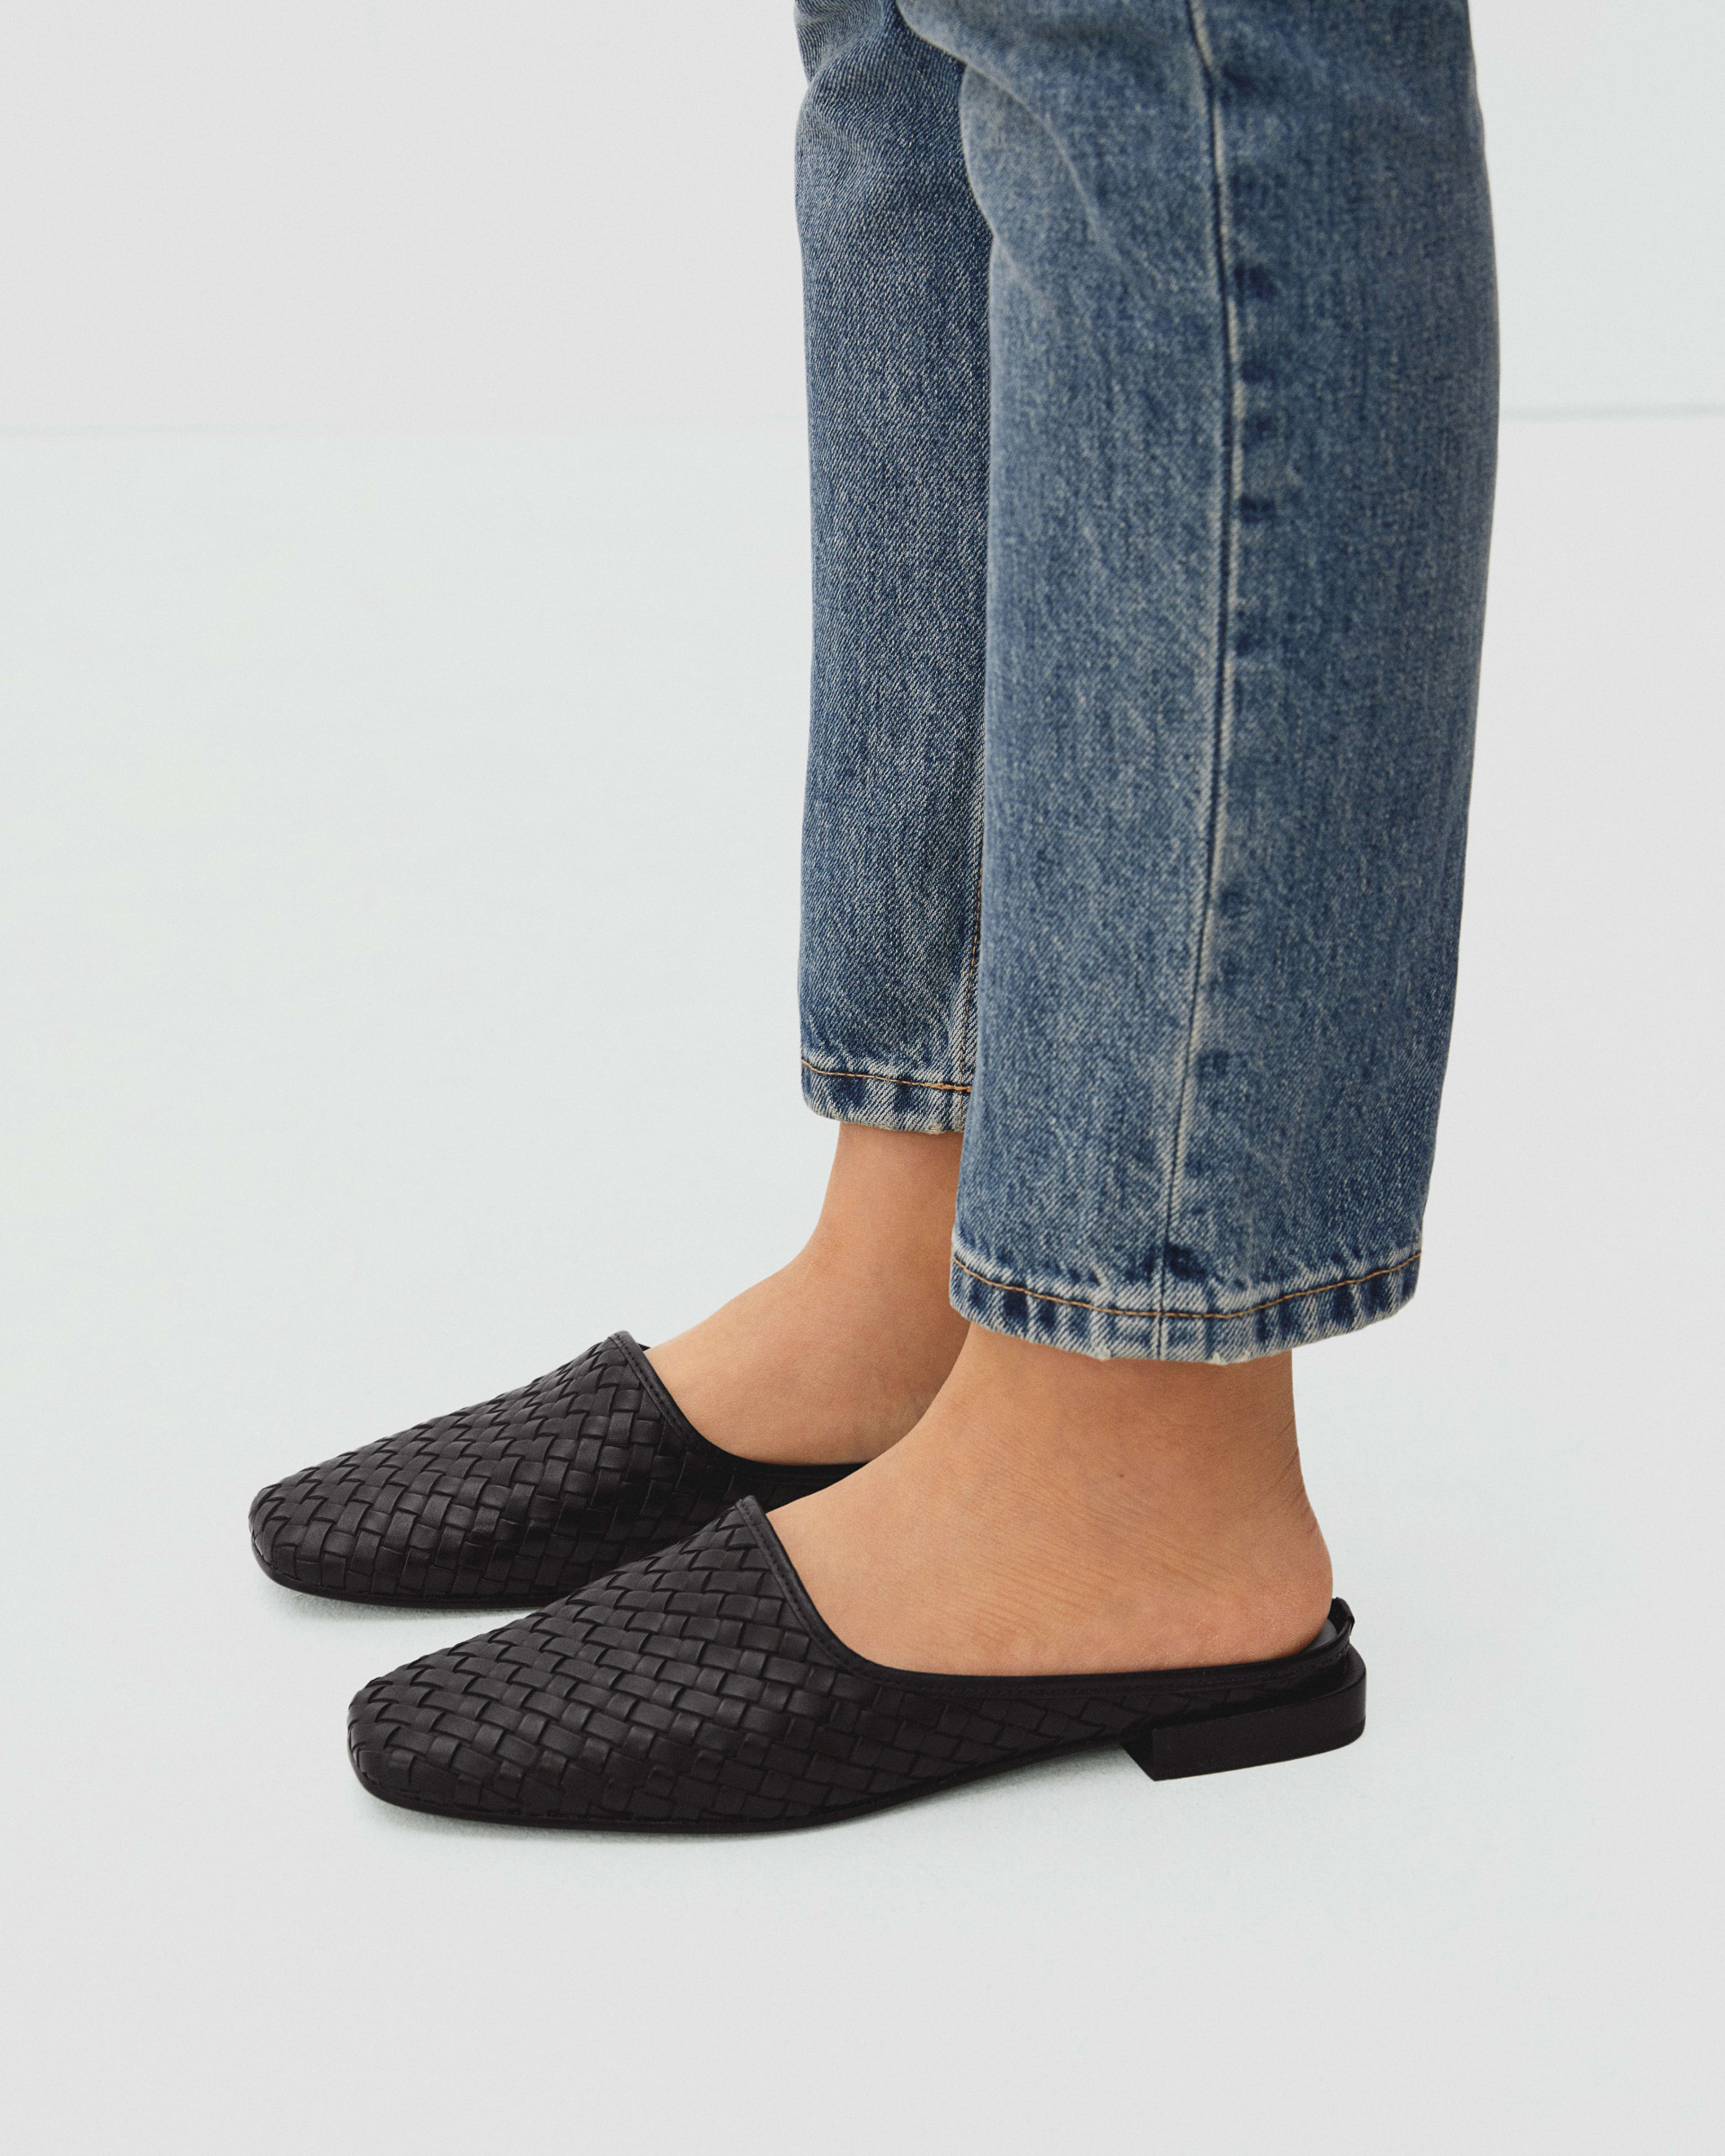 The Woven Leather Mule Black Woven – Everlane